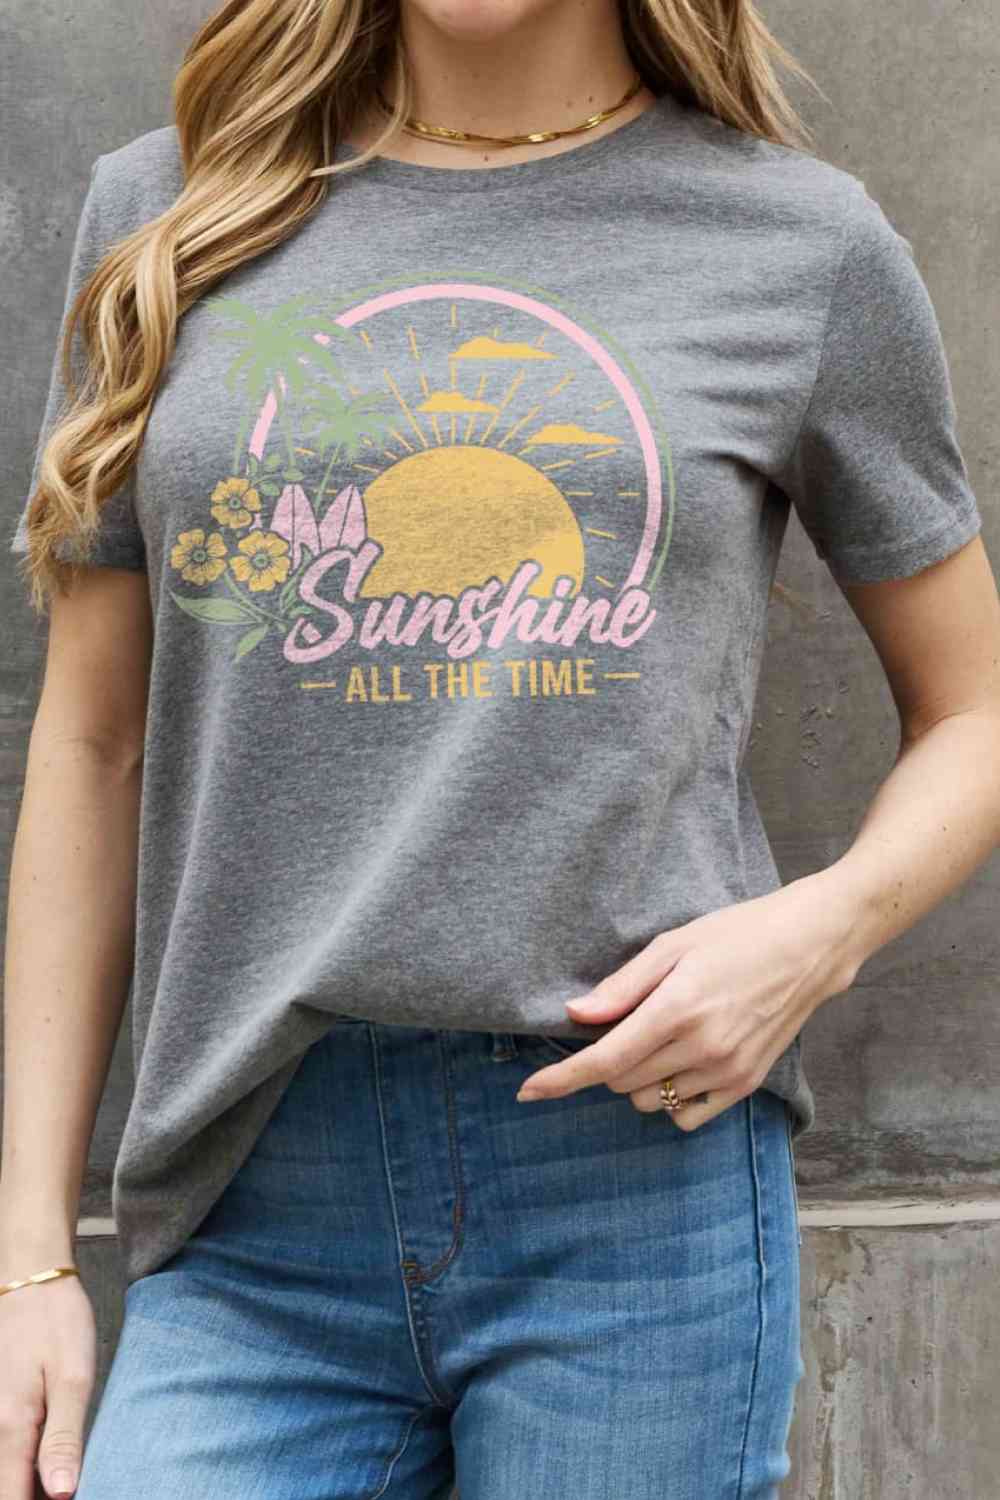 Simply Love Full Size SUNSHINE ALL THE TIME Graphic Cotton Tee - Shop Tophatter Deals, Electronics, Fashion, Jewelry, Health, Beauty, Home Decor, Free Shipping